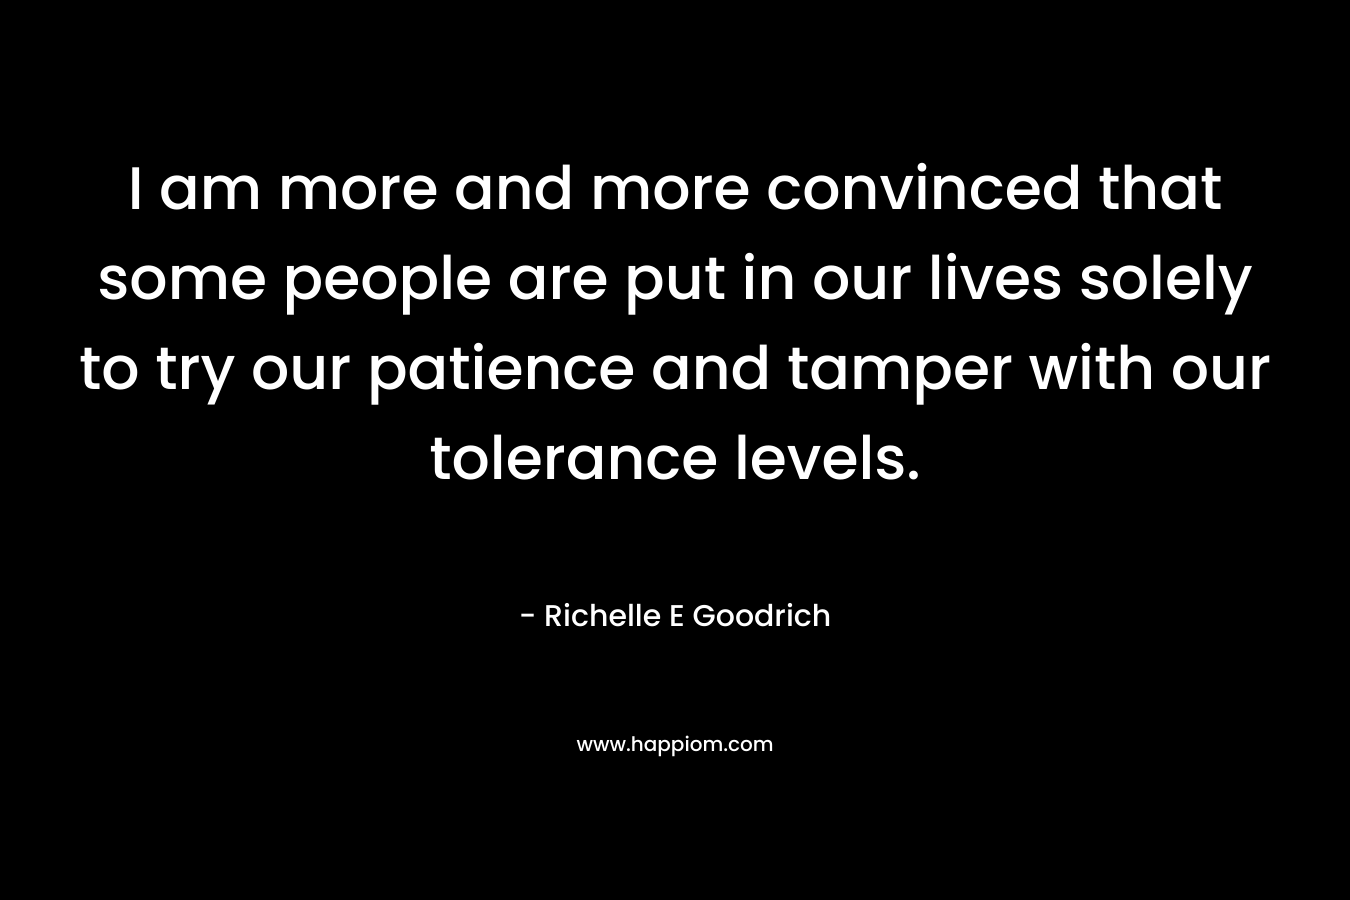 I am more and more convinced that some people are put in our lives solely to try our patience and tamper with our tolerance levels. – Richelle E Goodrich